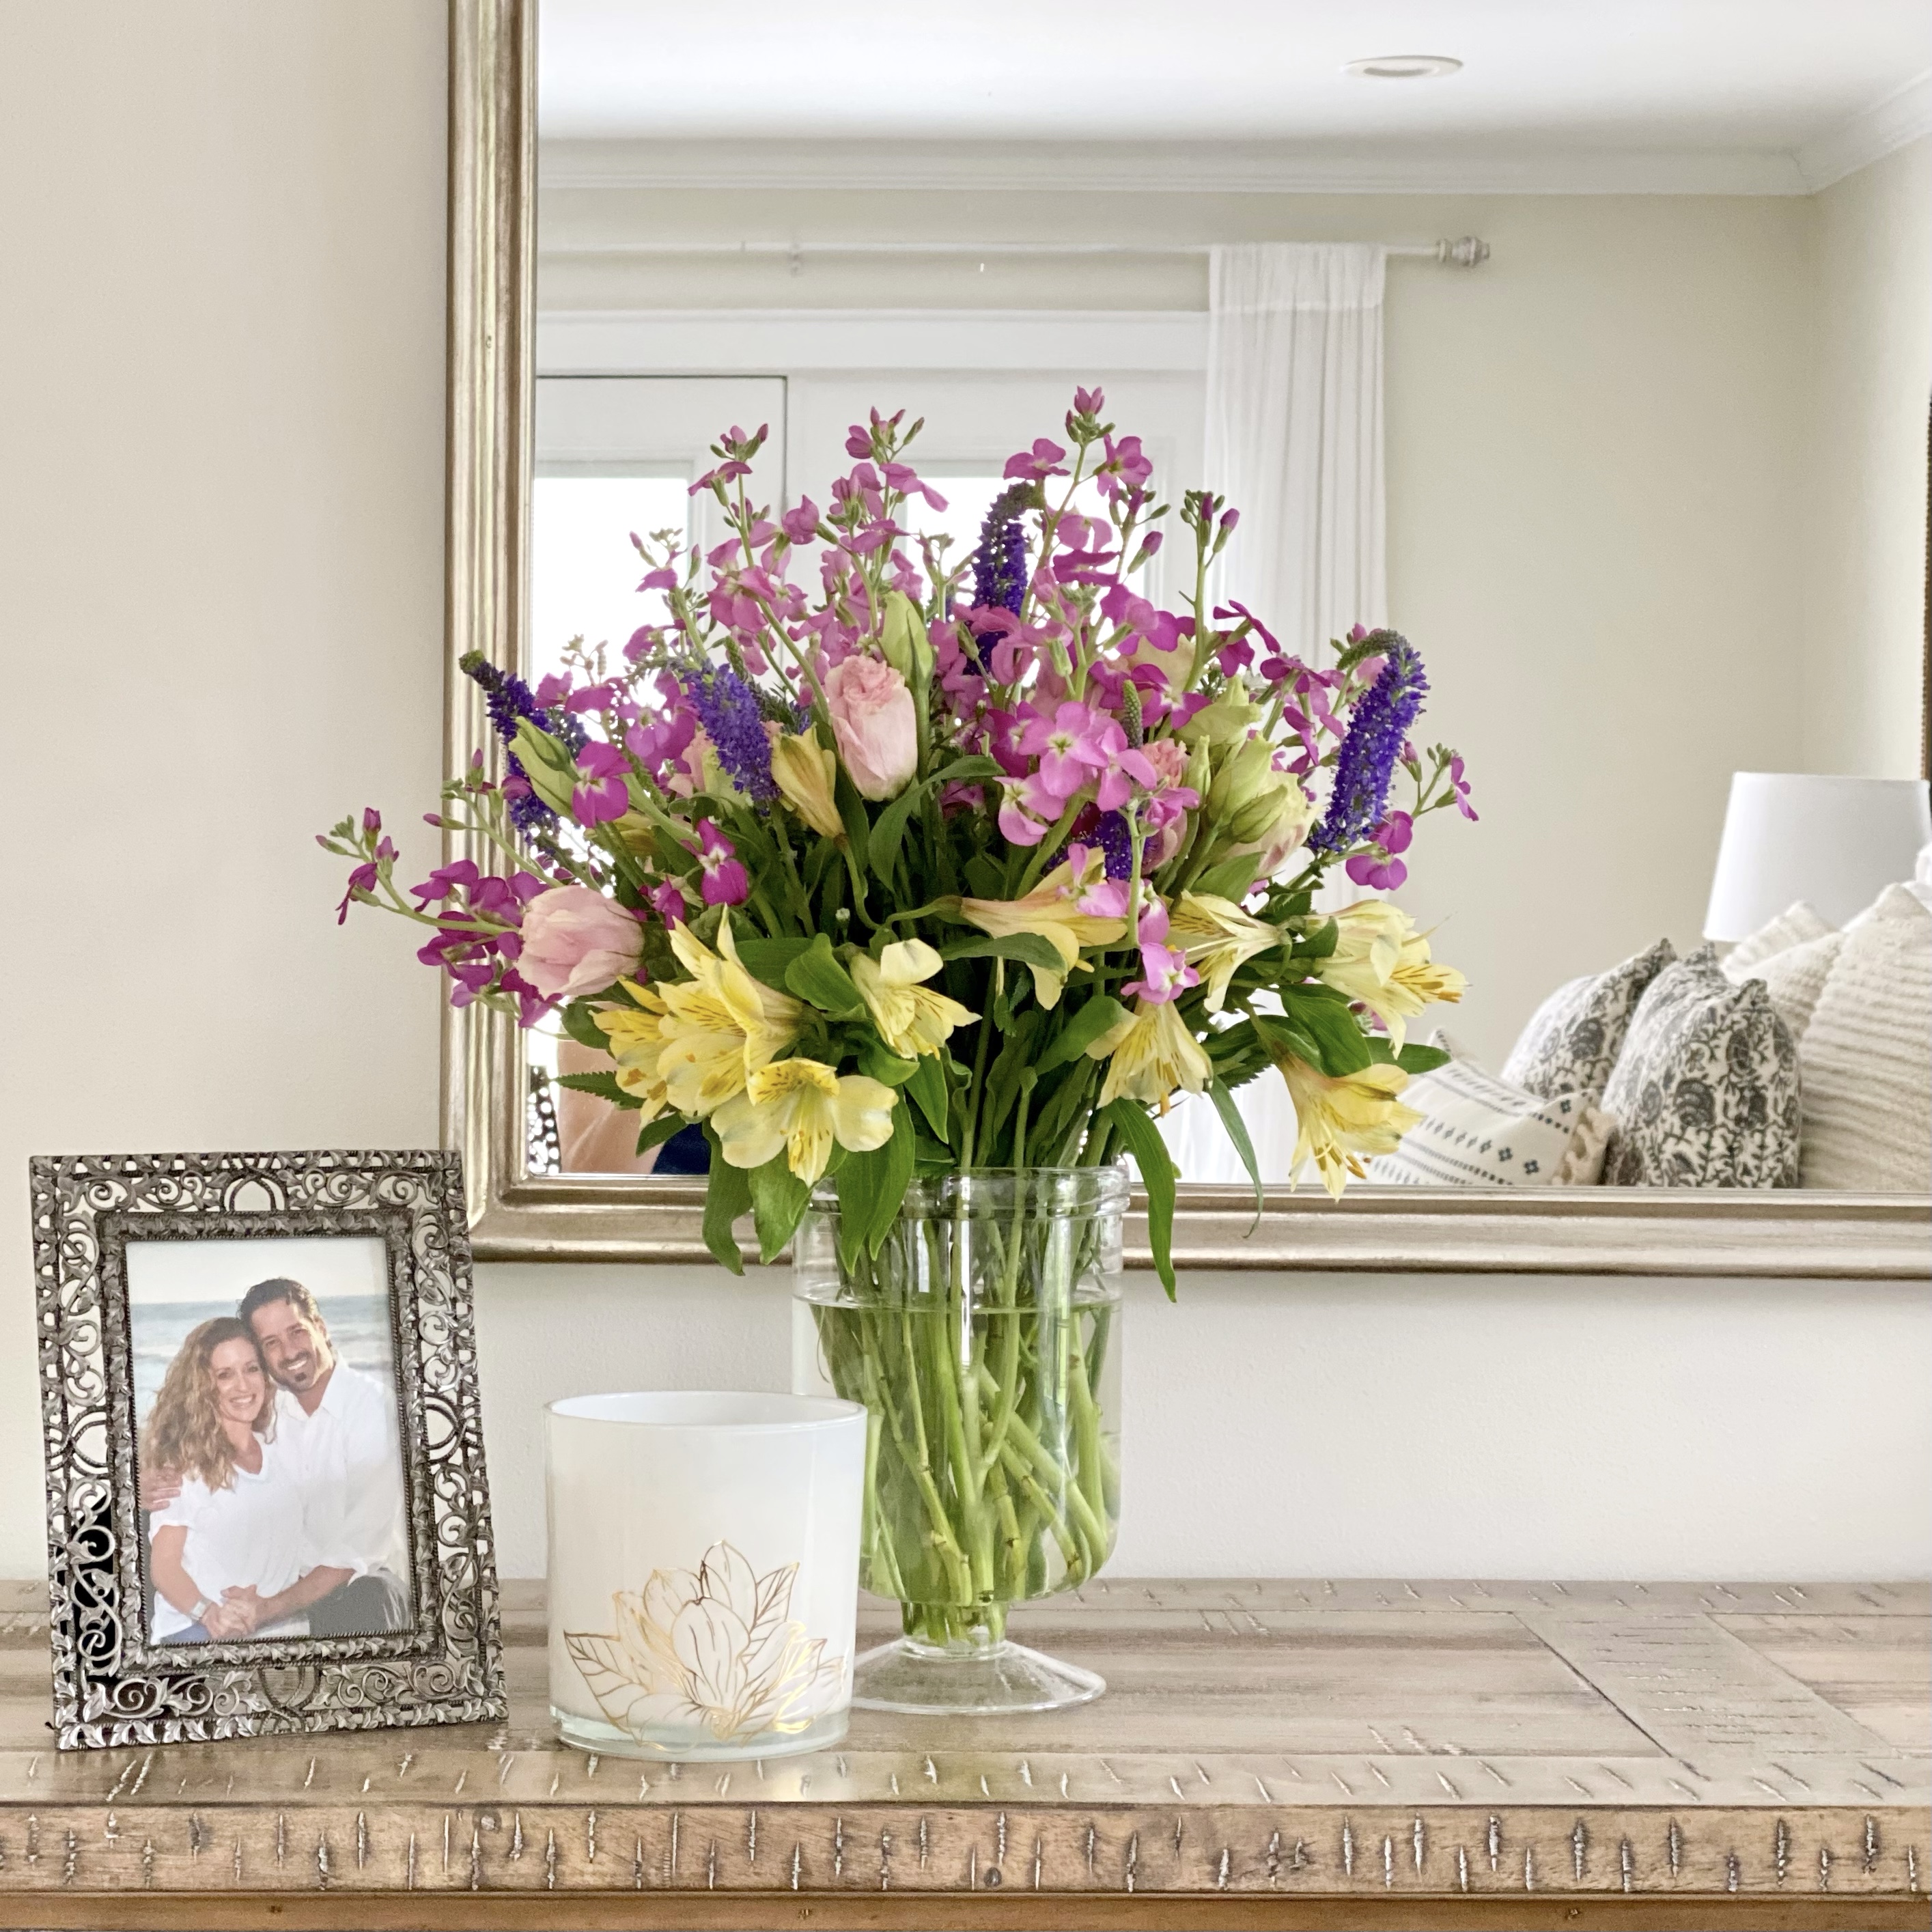 Fresh summer flowers on a dresser with a photo in a frame and a candle a mirror is in the background.